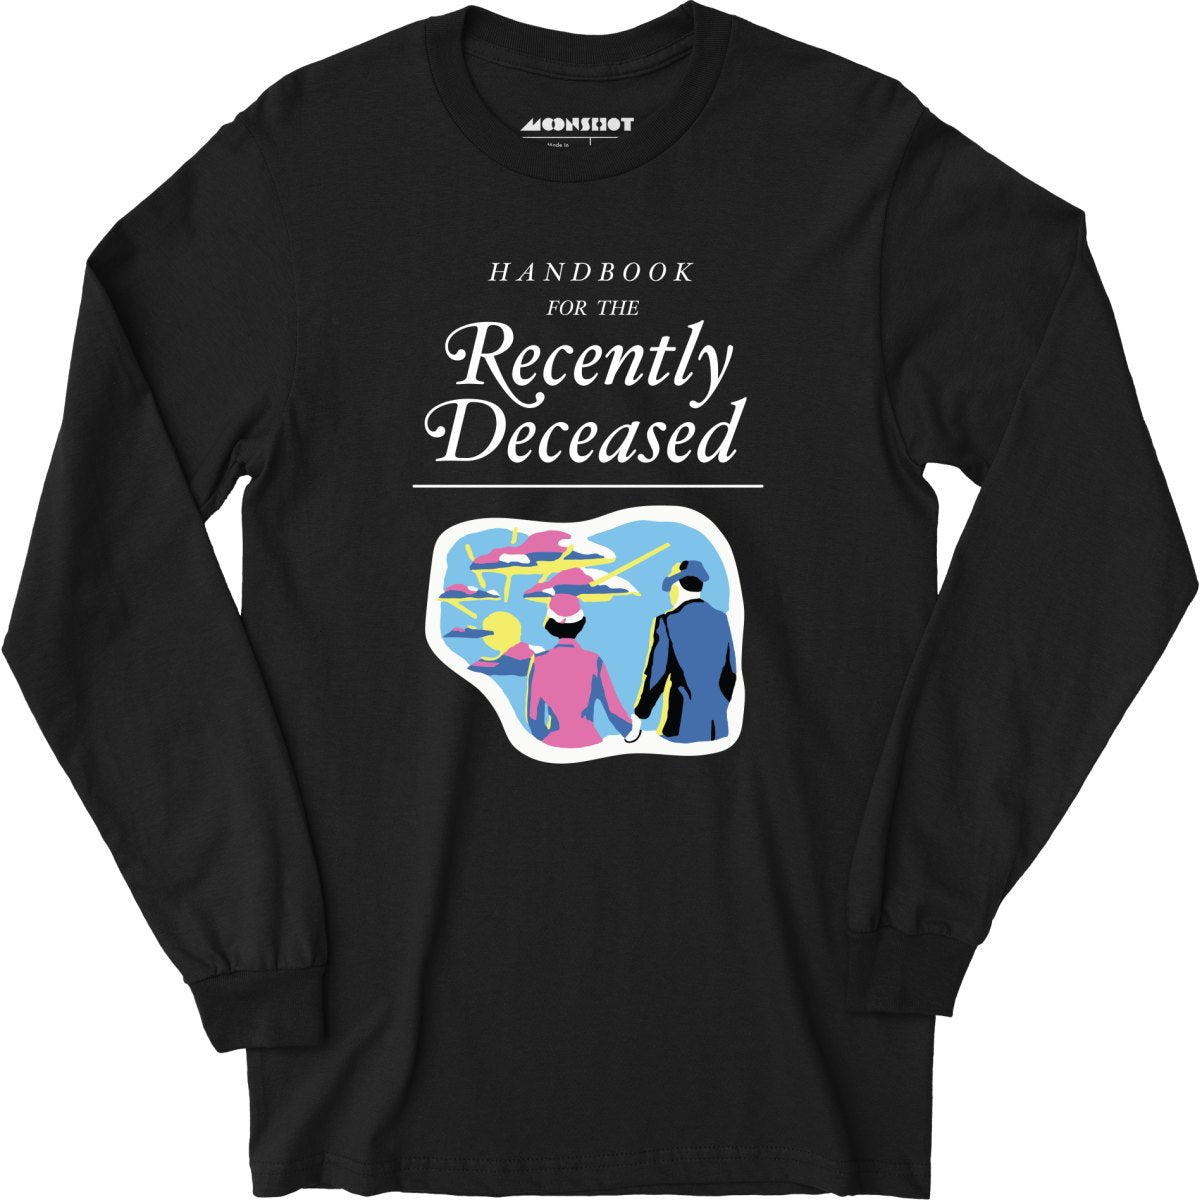 Handbook for the Recently Deceased - Long Sleeve T-Shirt